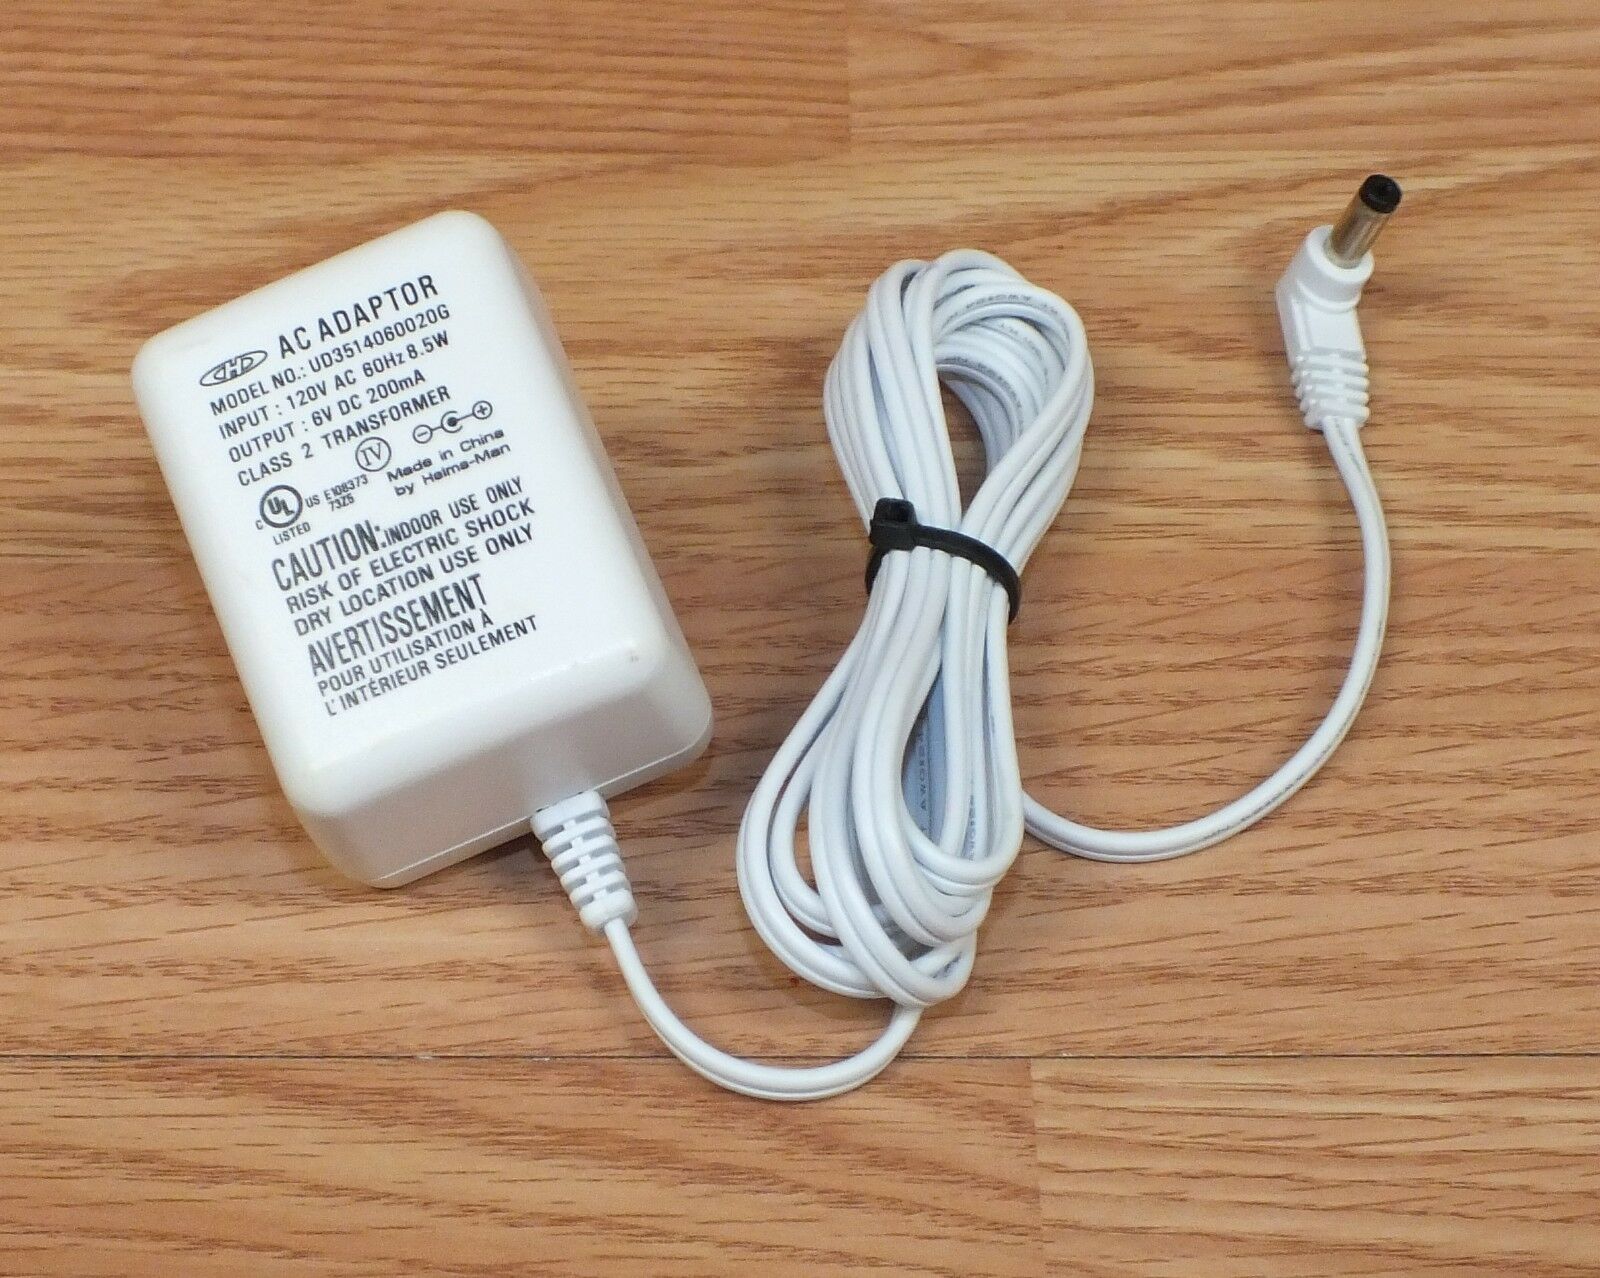 H Brand (UD3514060020G) 6V DC 200mA Class 2 Transformer Power Supply Only Country/Region of Manufacture: China MPN: UD3